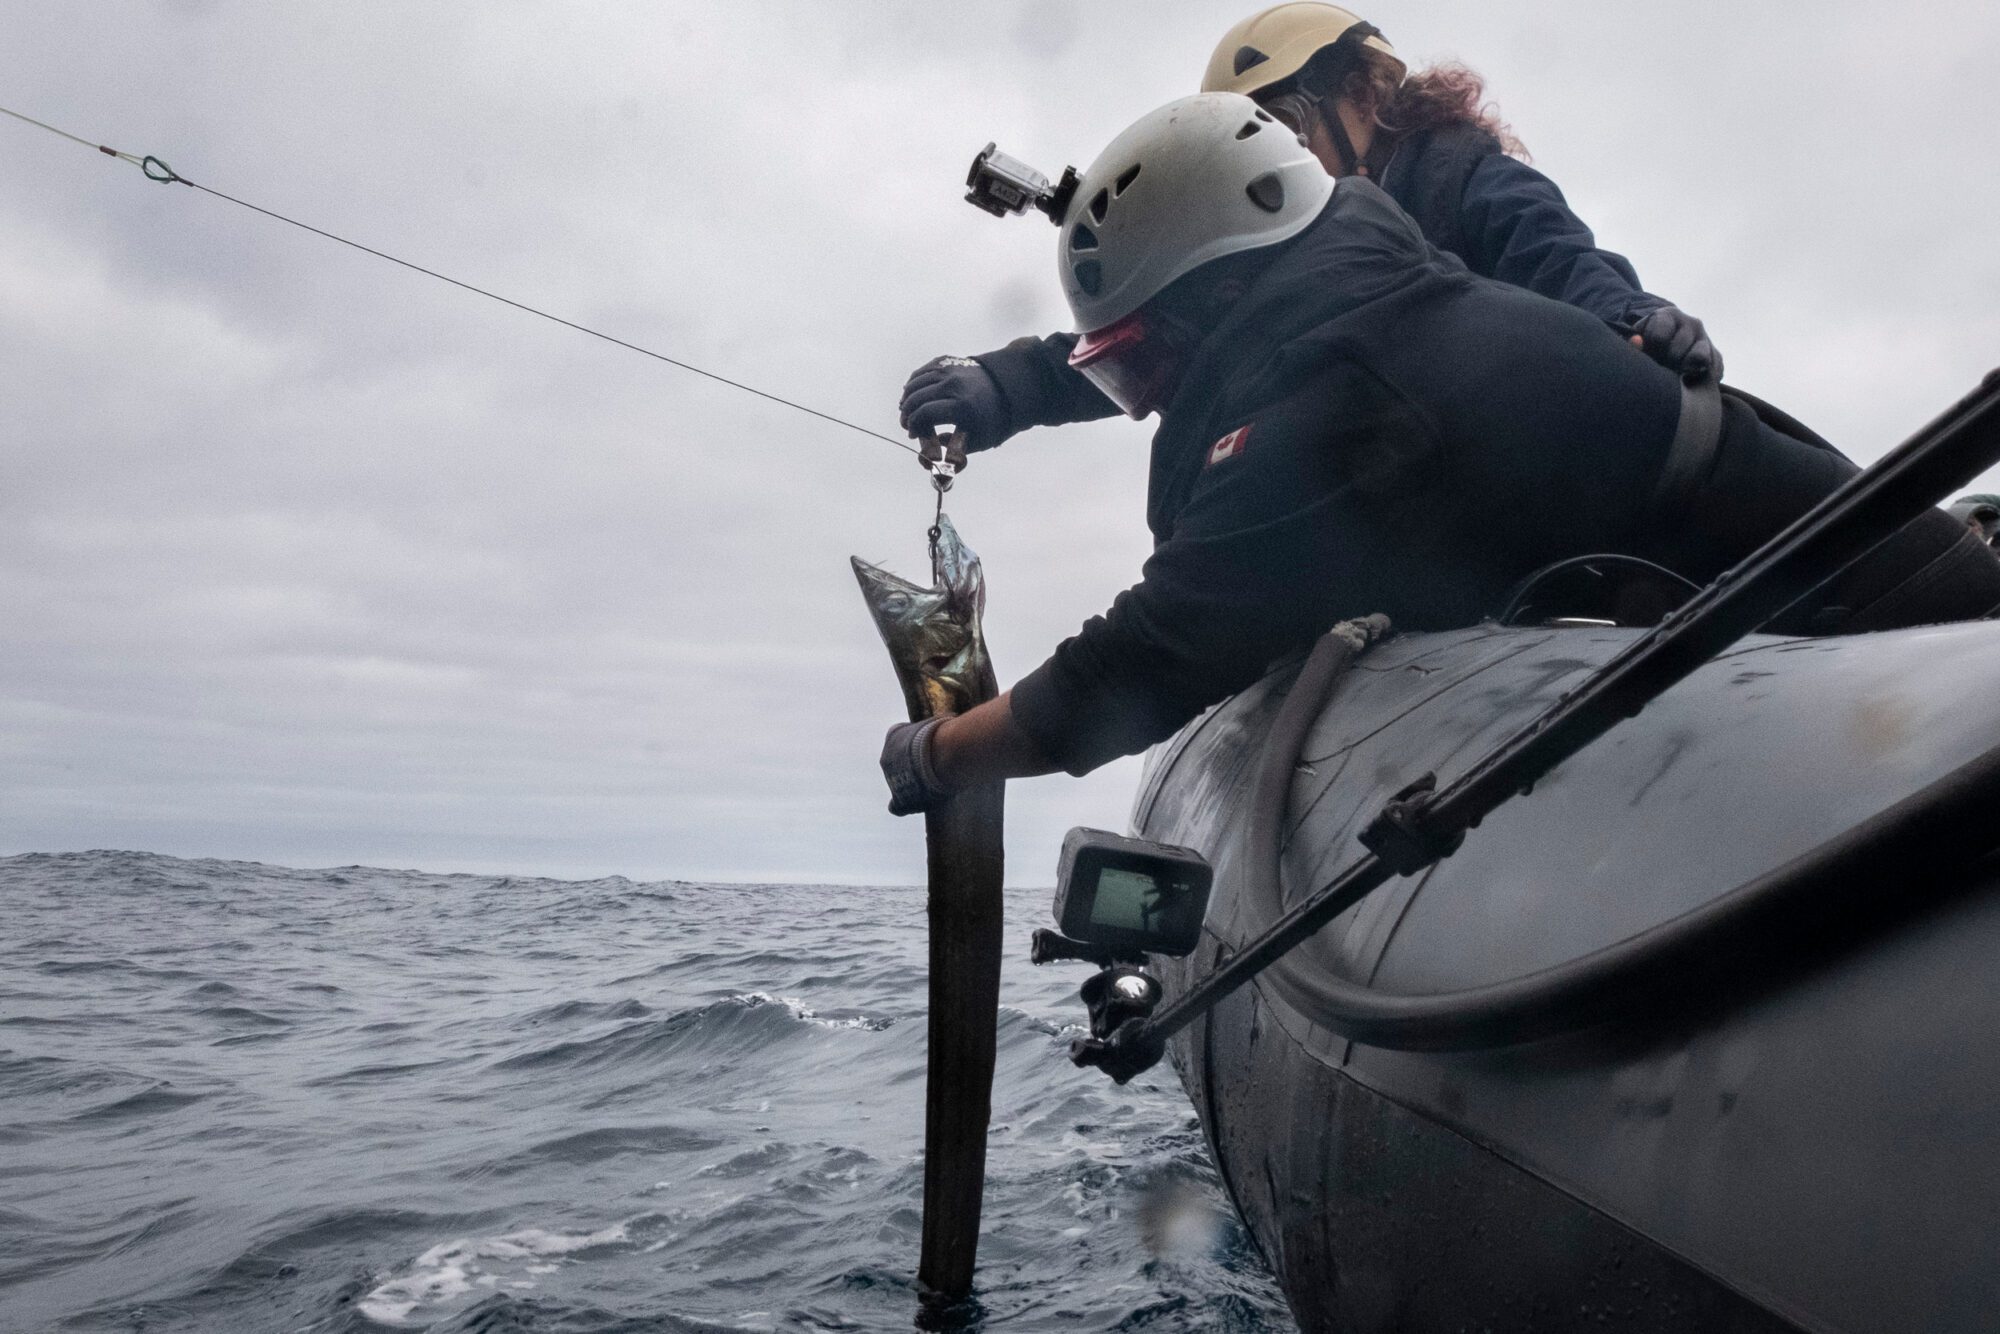 Activist in an inflatable boat use wirecutters to free a lancetfish from a fishing line. One holds the fish out of the water while the other cuts the line.